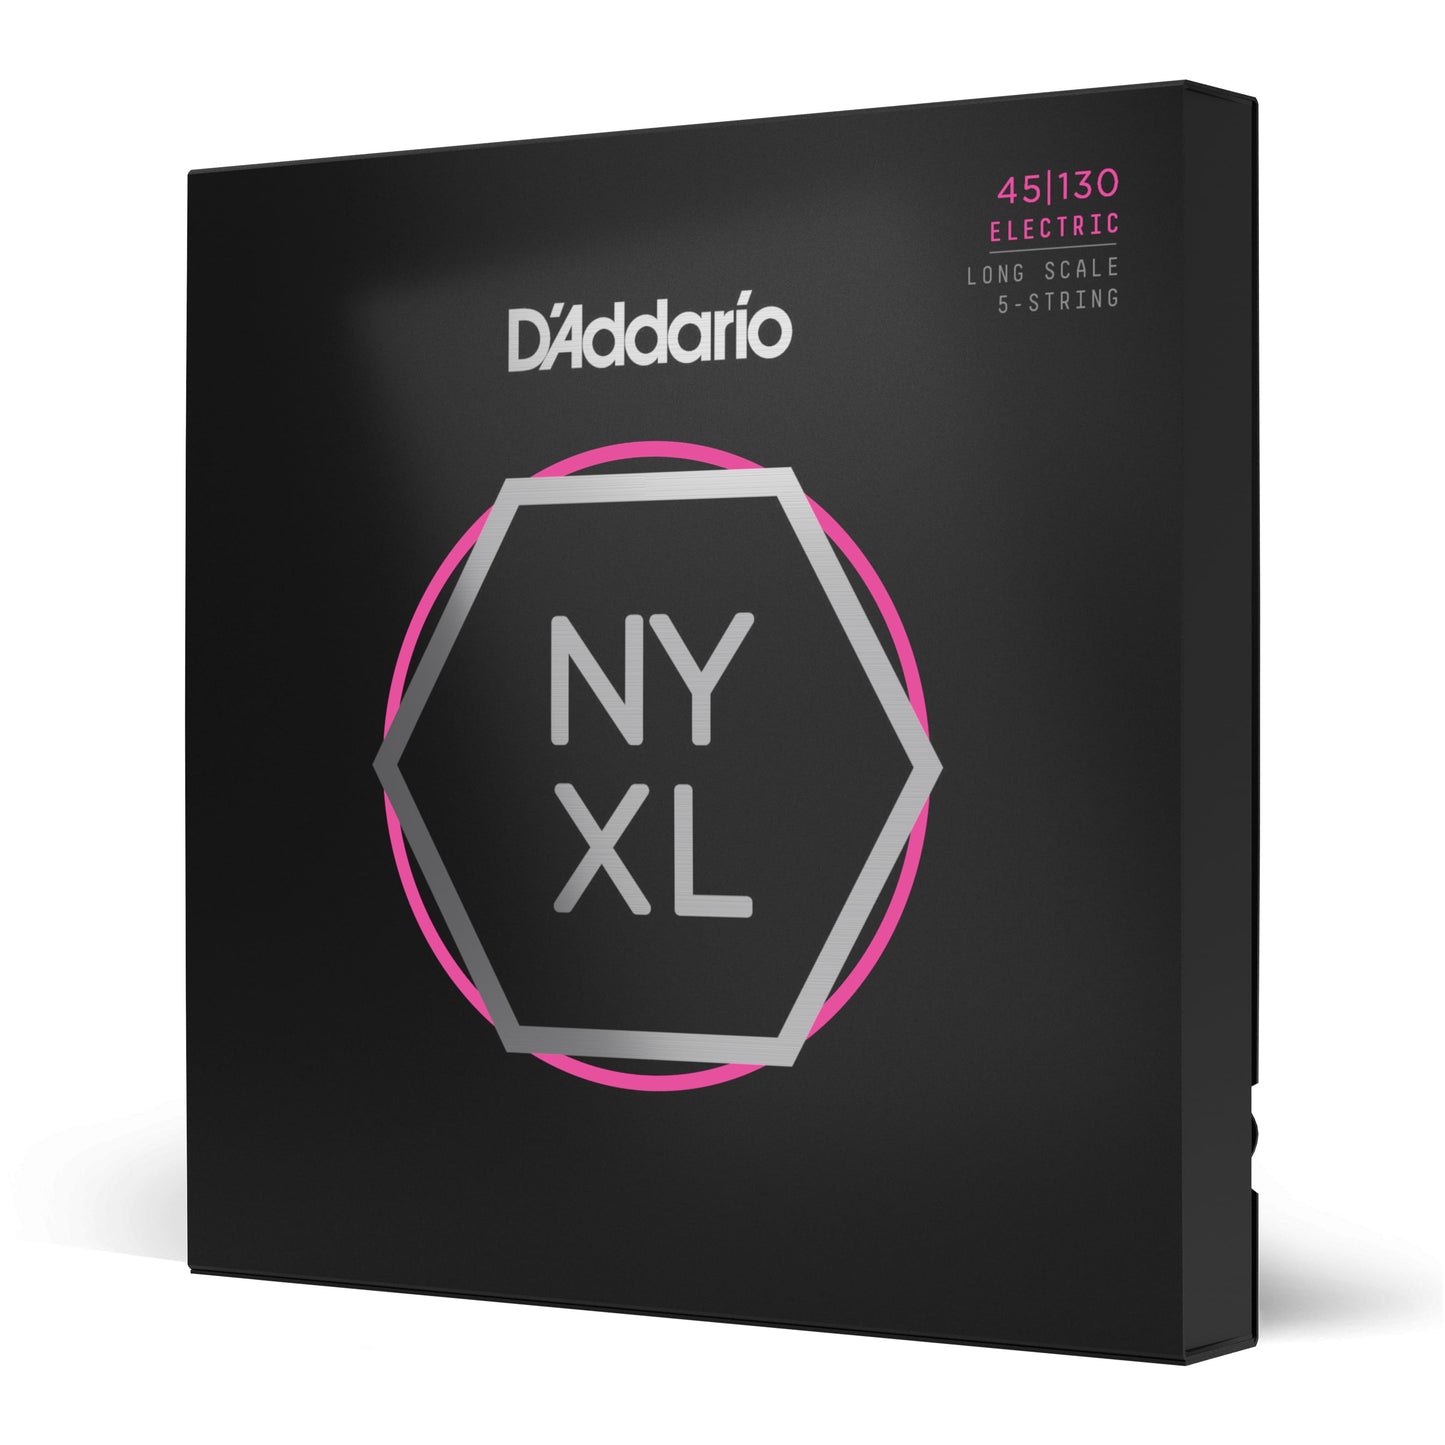 D'Addario NYXL45130 Long Scale Nickel Wound 5-String Electric Bass Strings